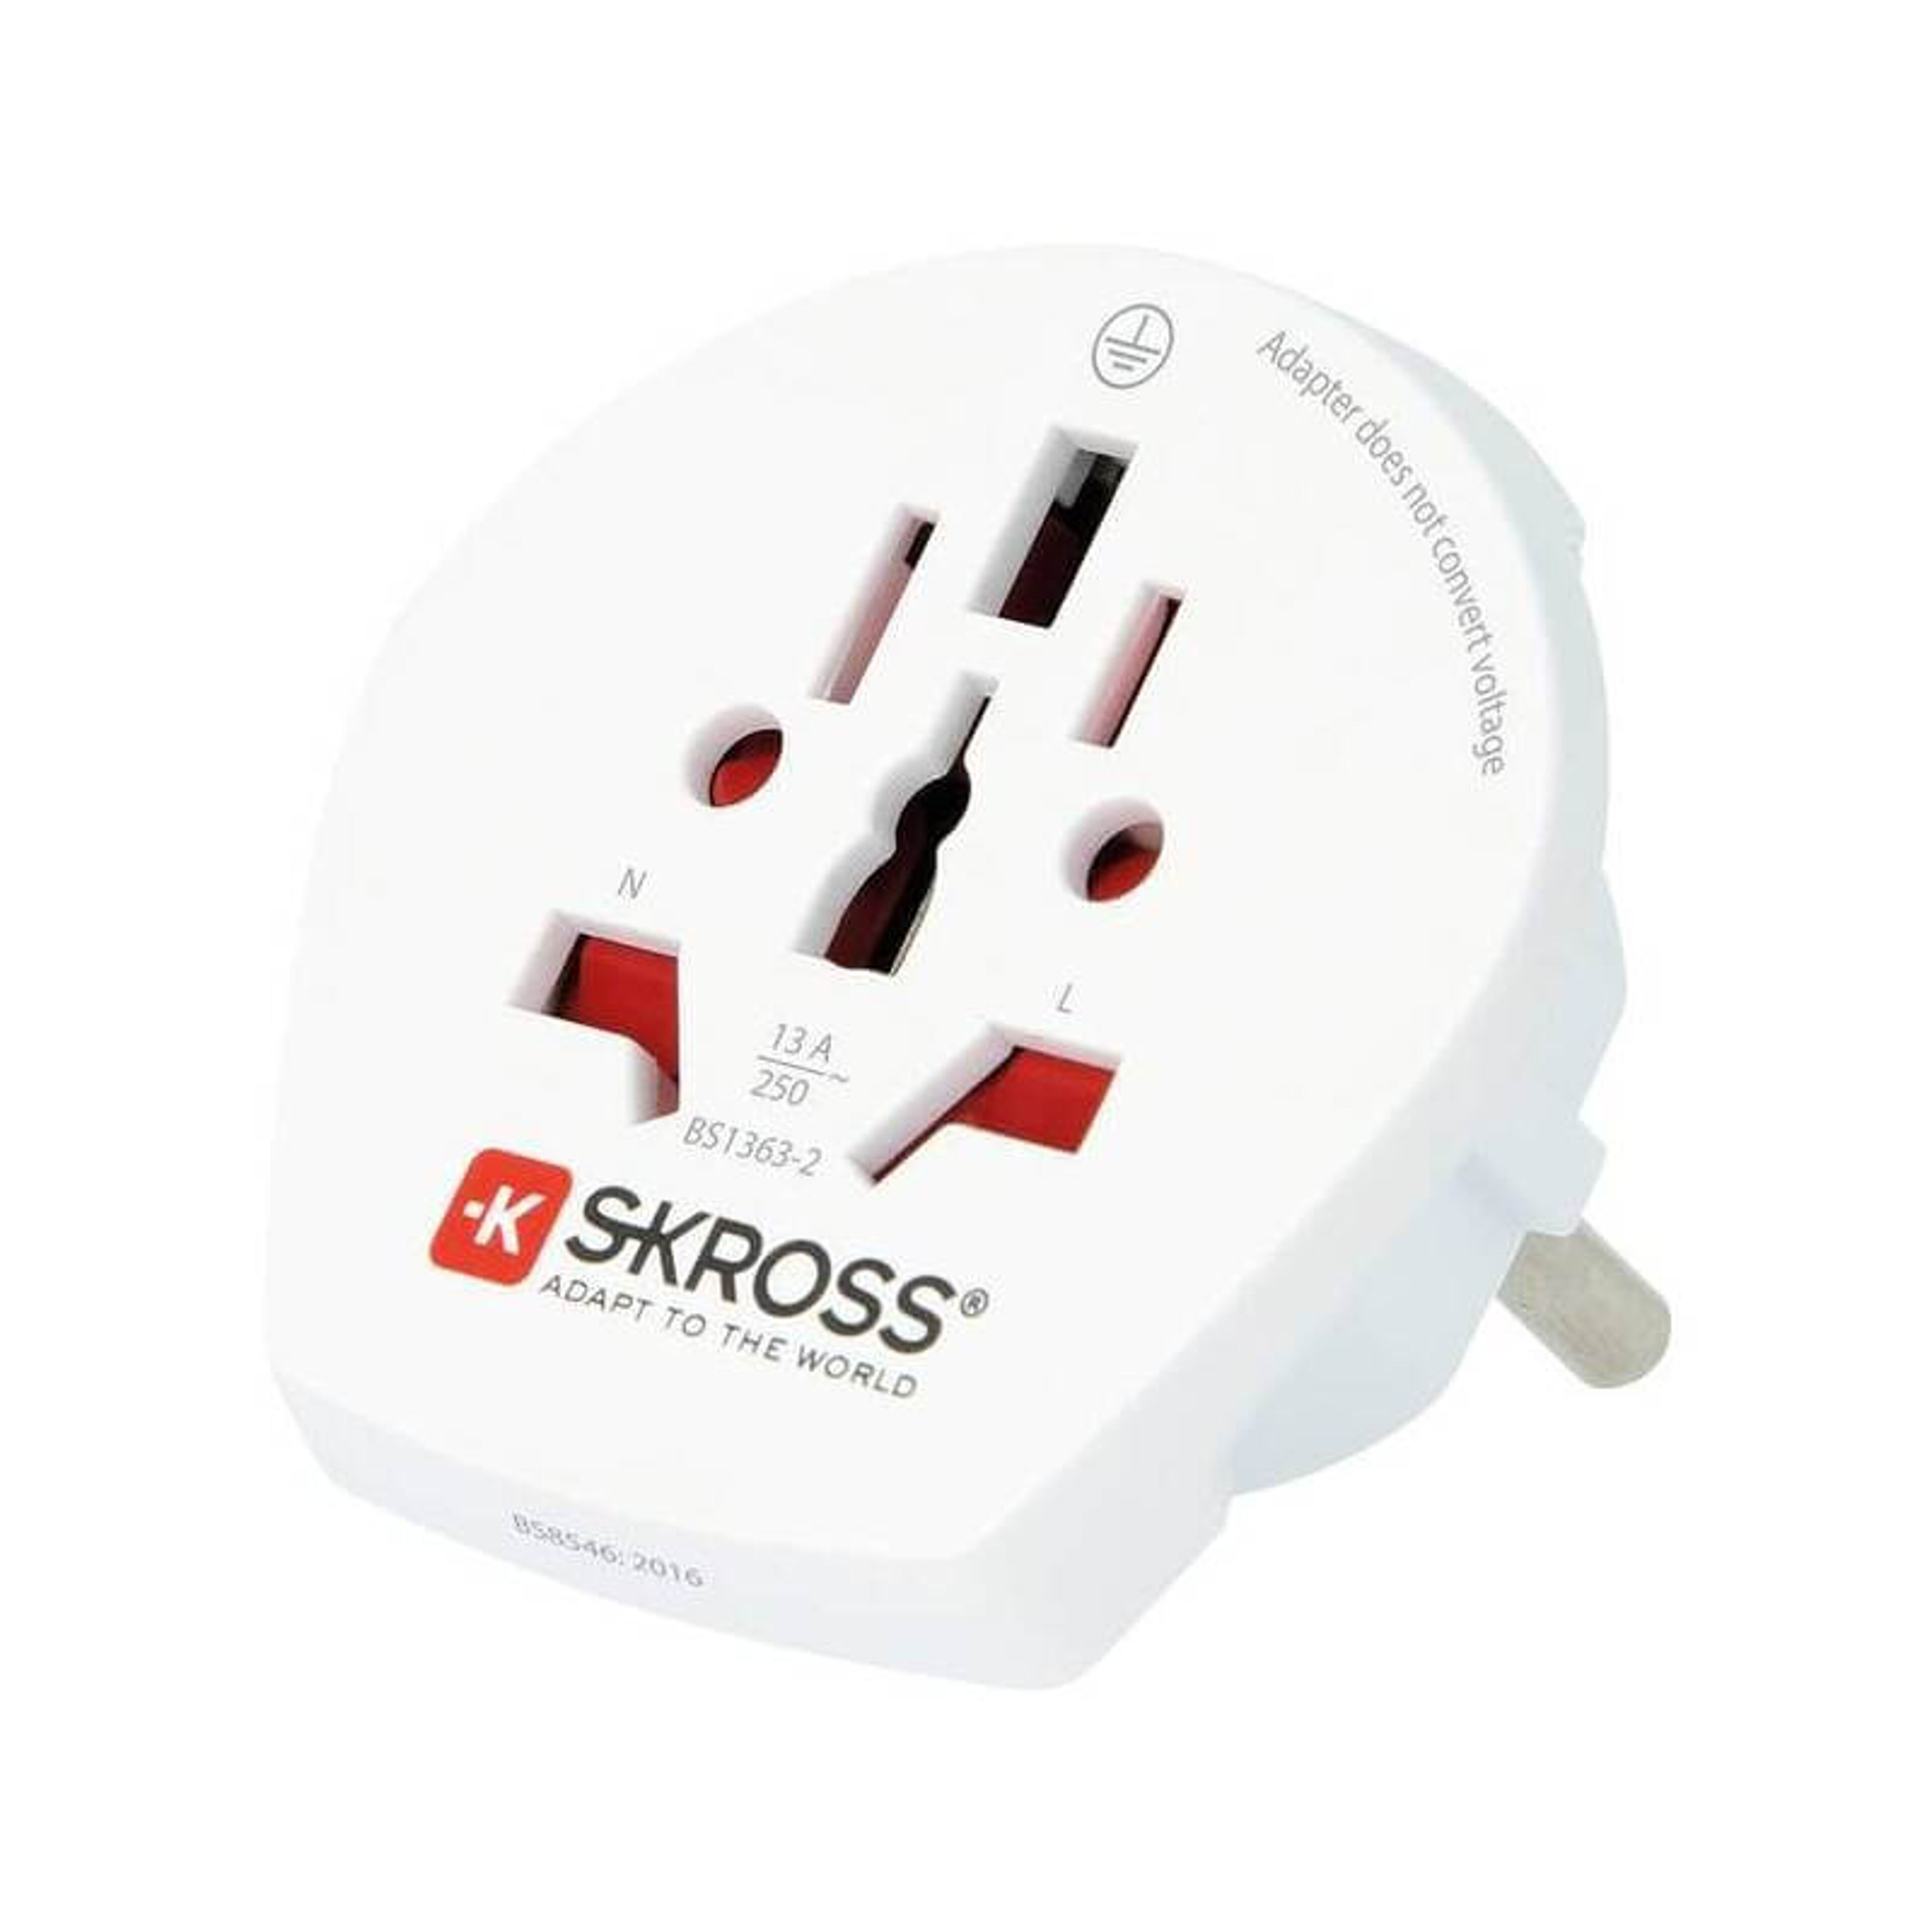 SKROSS travel adapter for foreigners in Europe